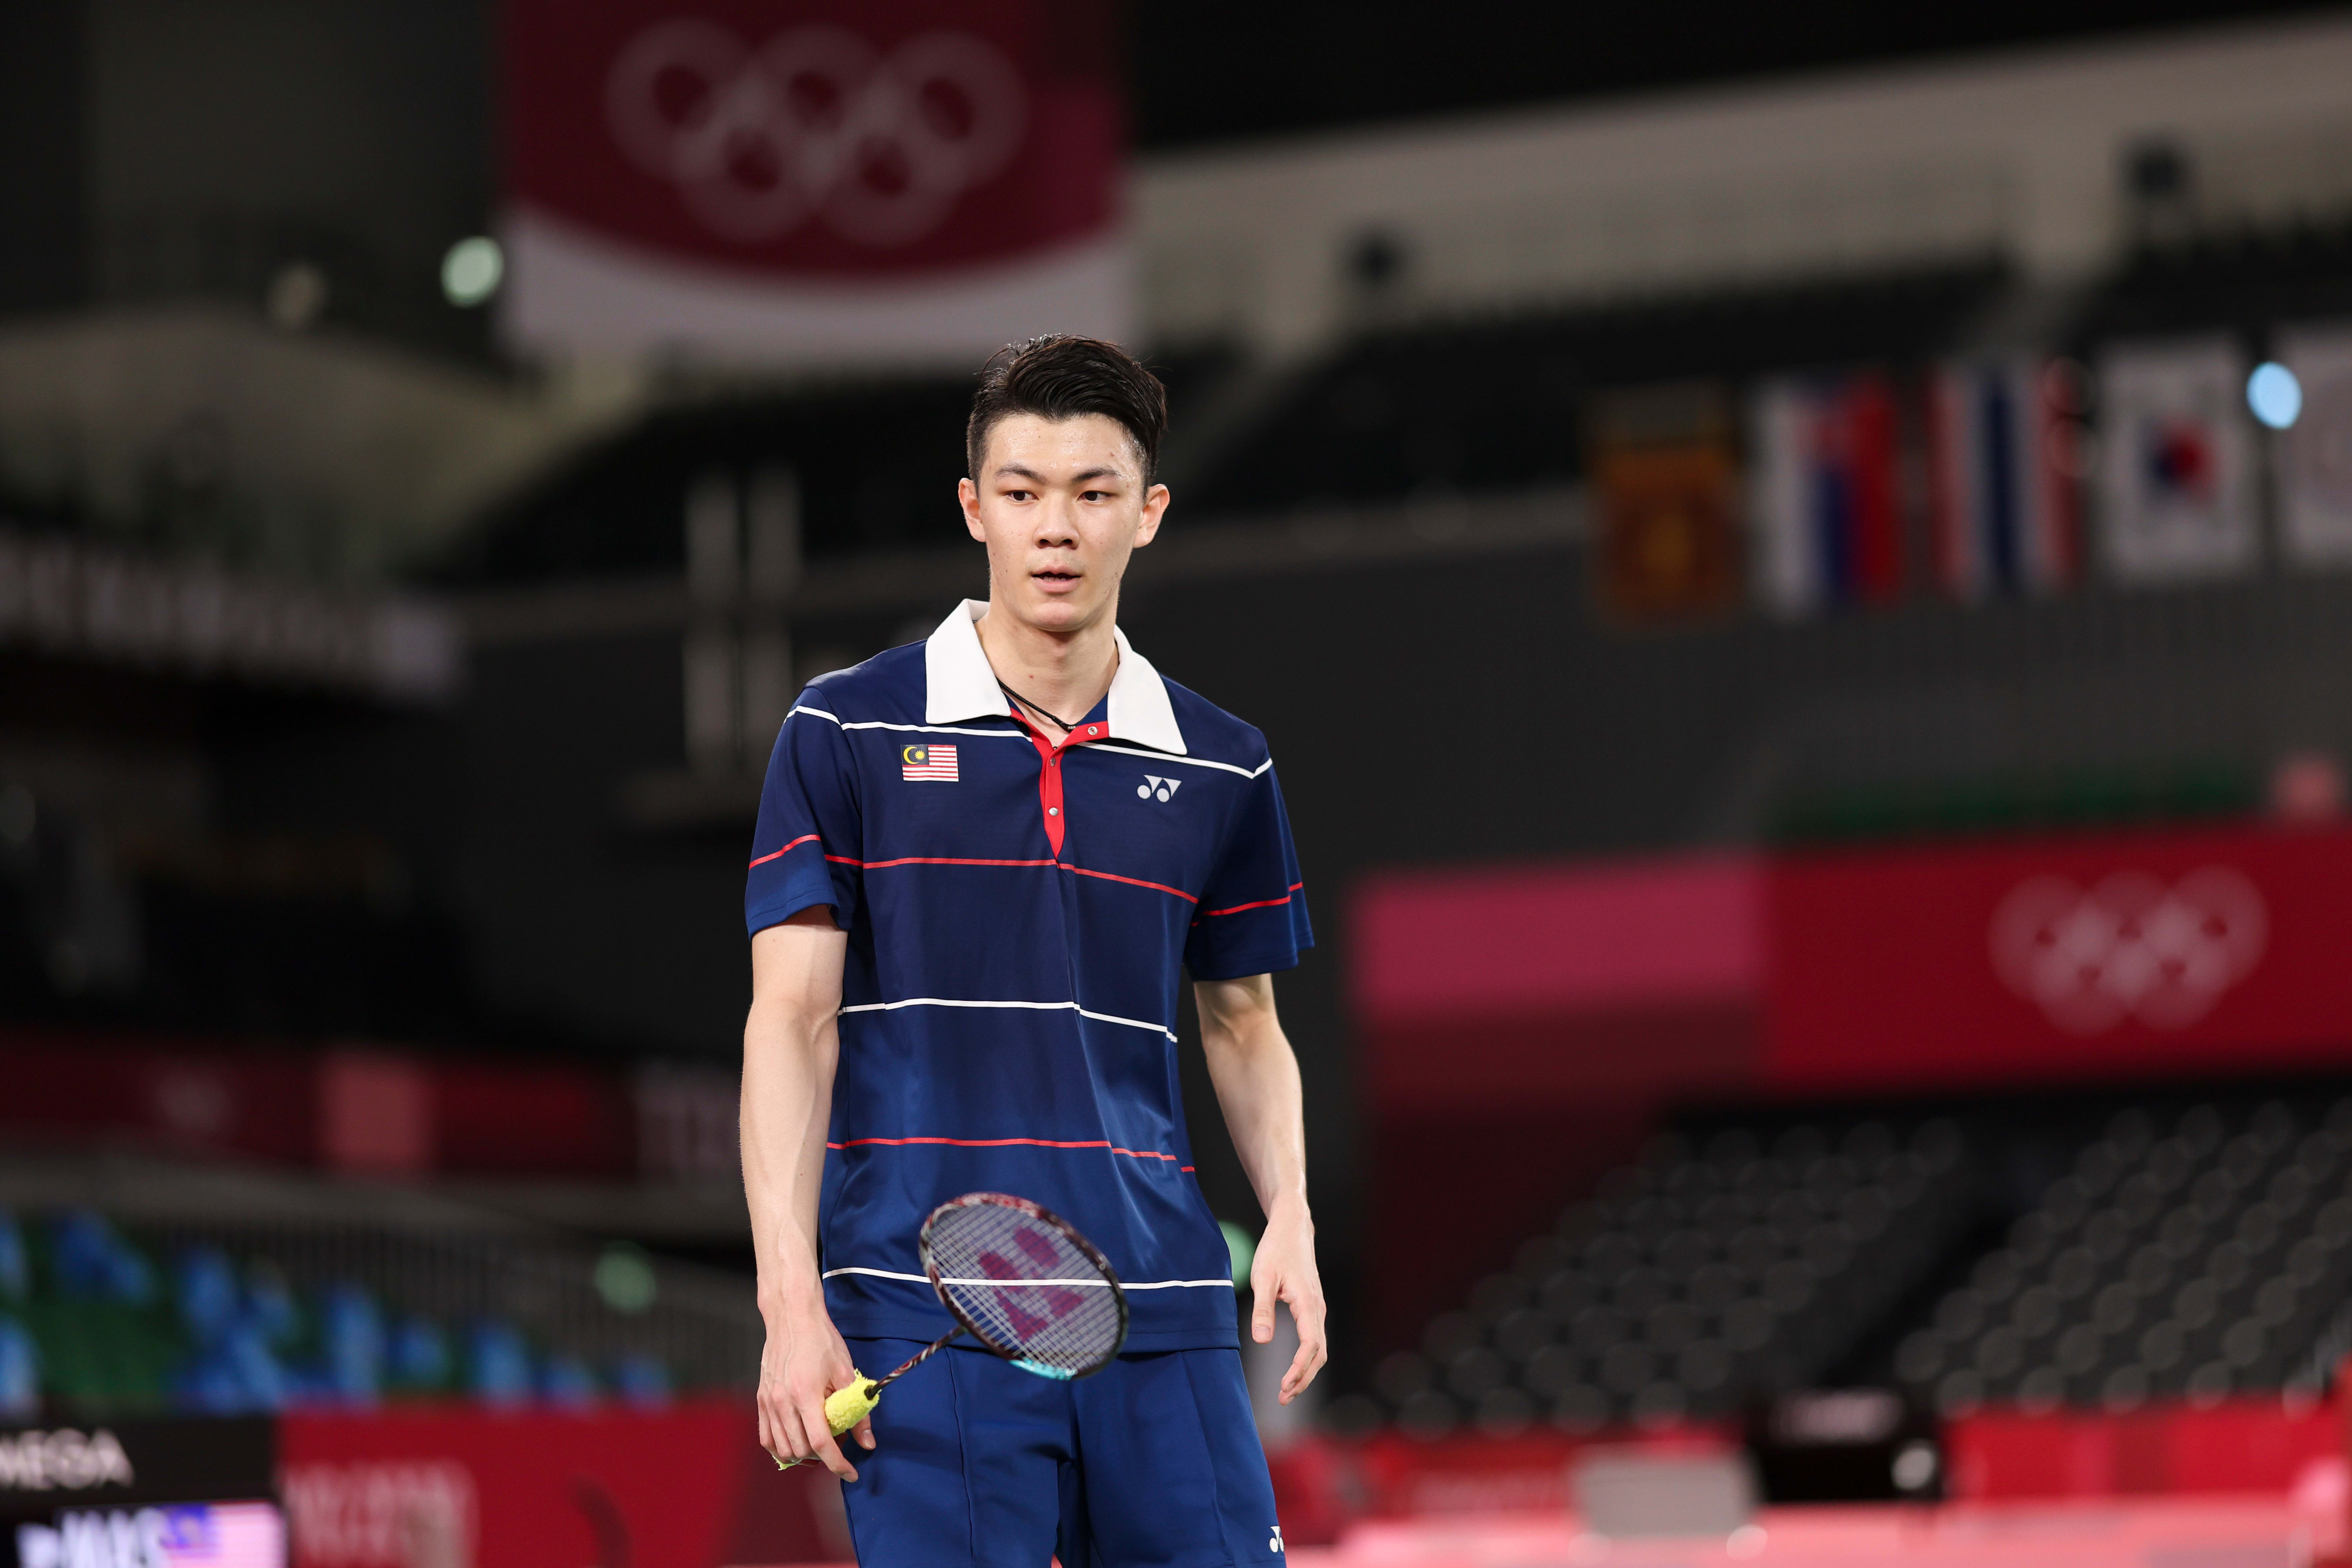 Badminton How to watch 2022 BWF World Championships